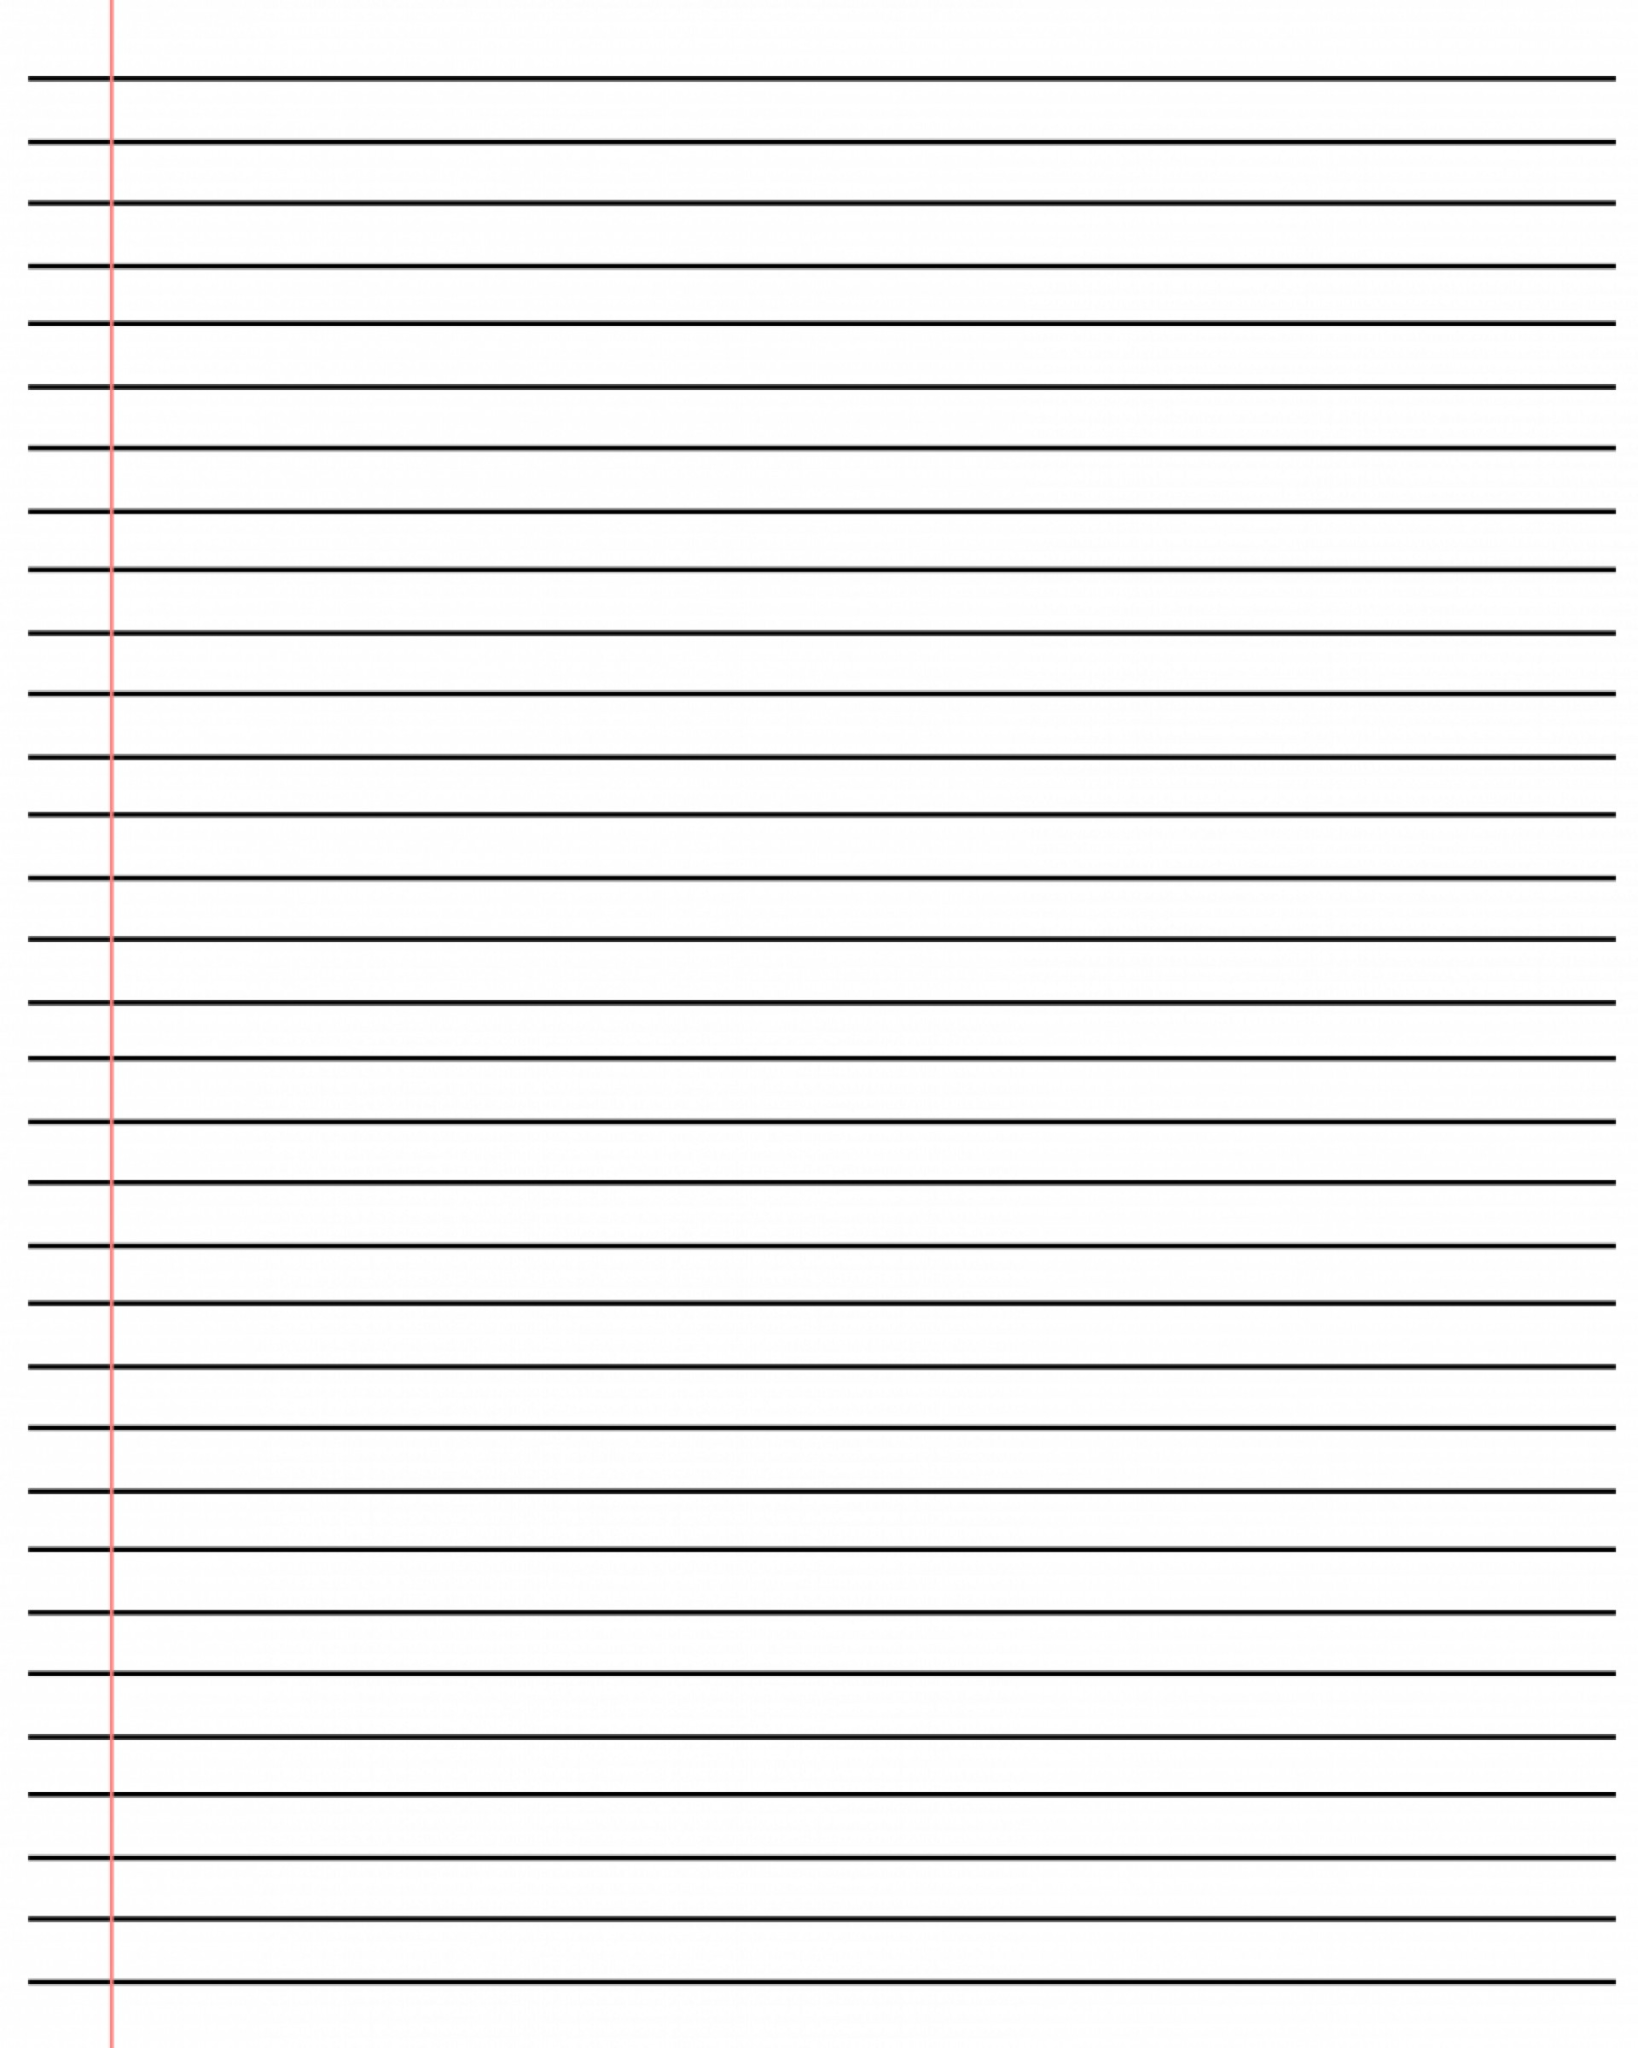 042-printable-lined-paper-college-ruled-awesome-image-with-in-college